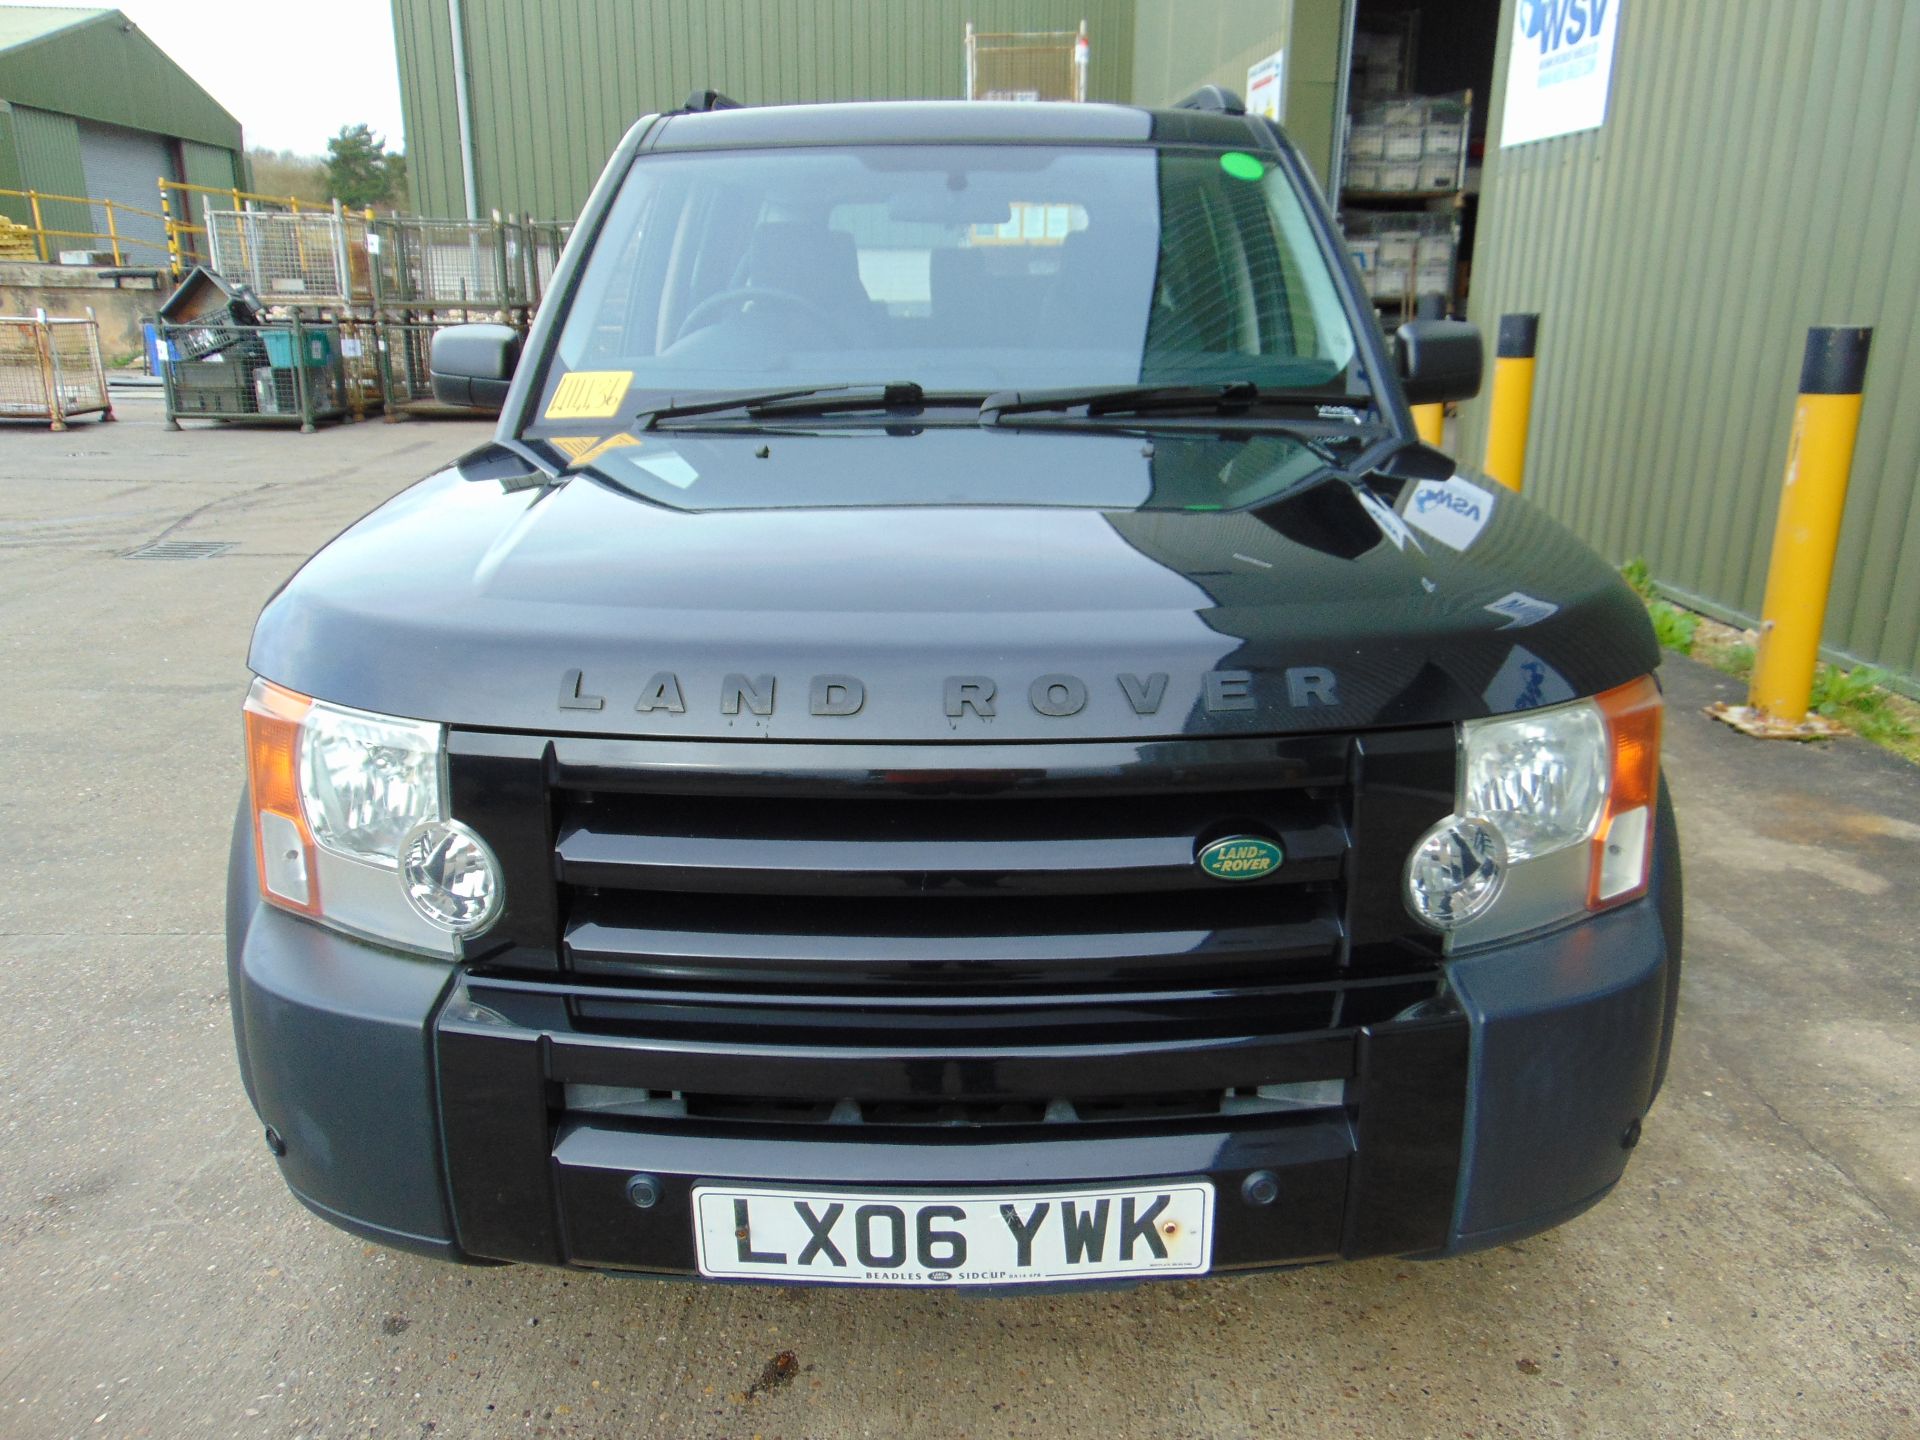 2006 Land Rover Discovery 3 TDV6 2.7 Ltr Auto - 4WD - 5 dr 7 Seater - Black - Image 7 of 49